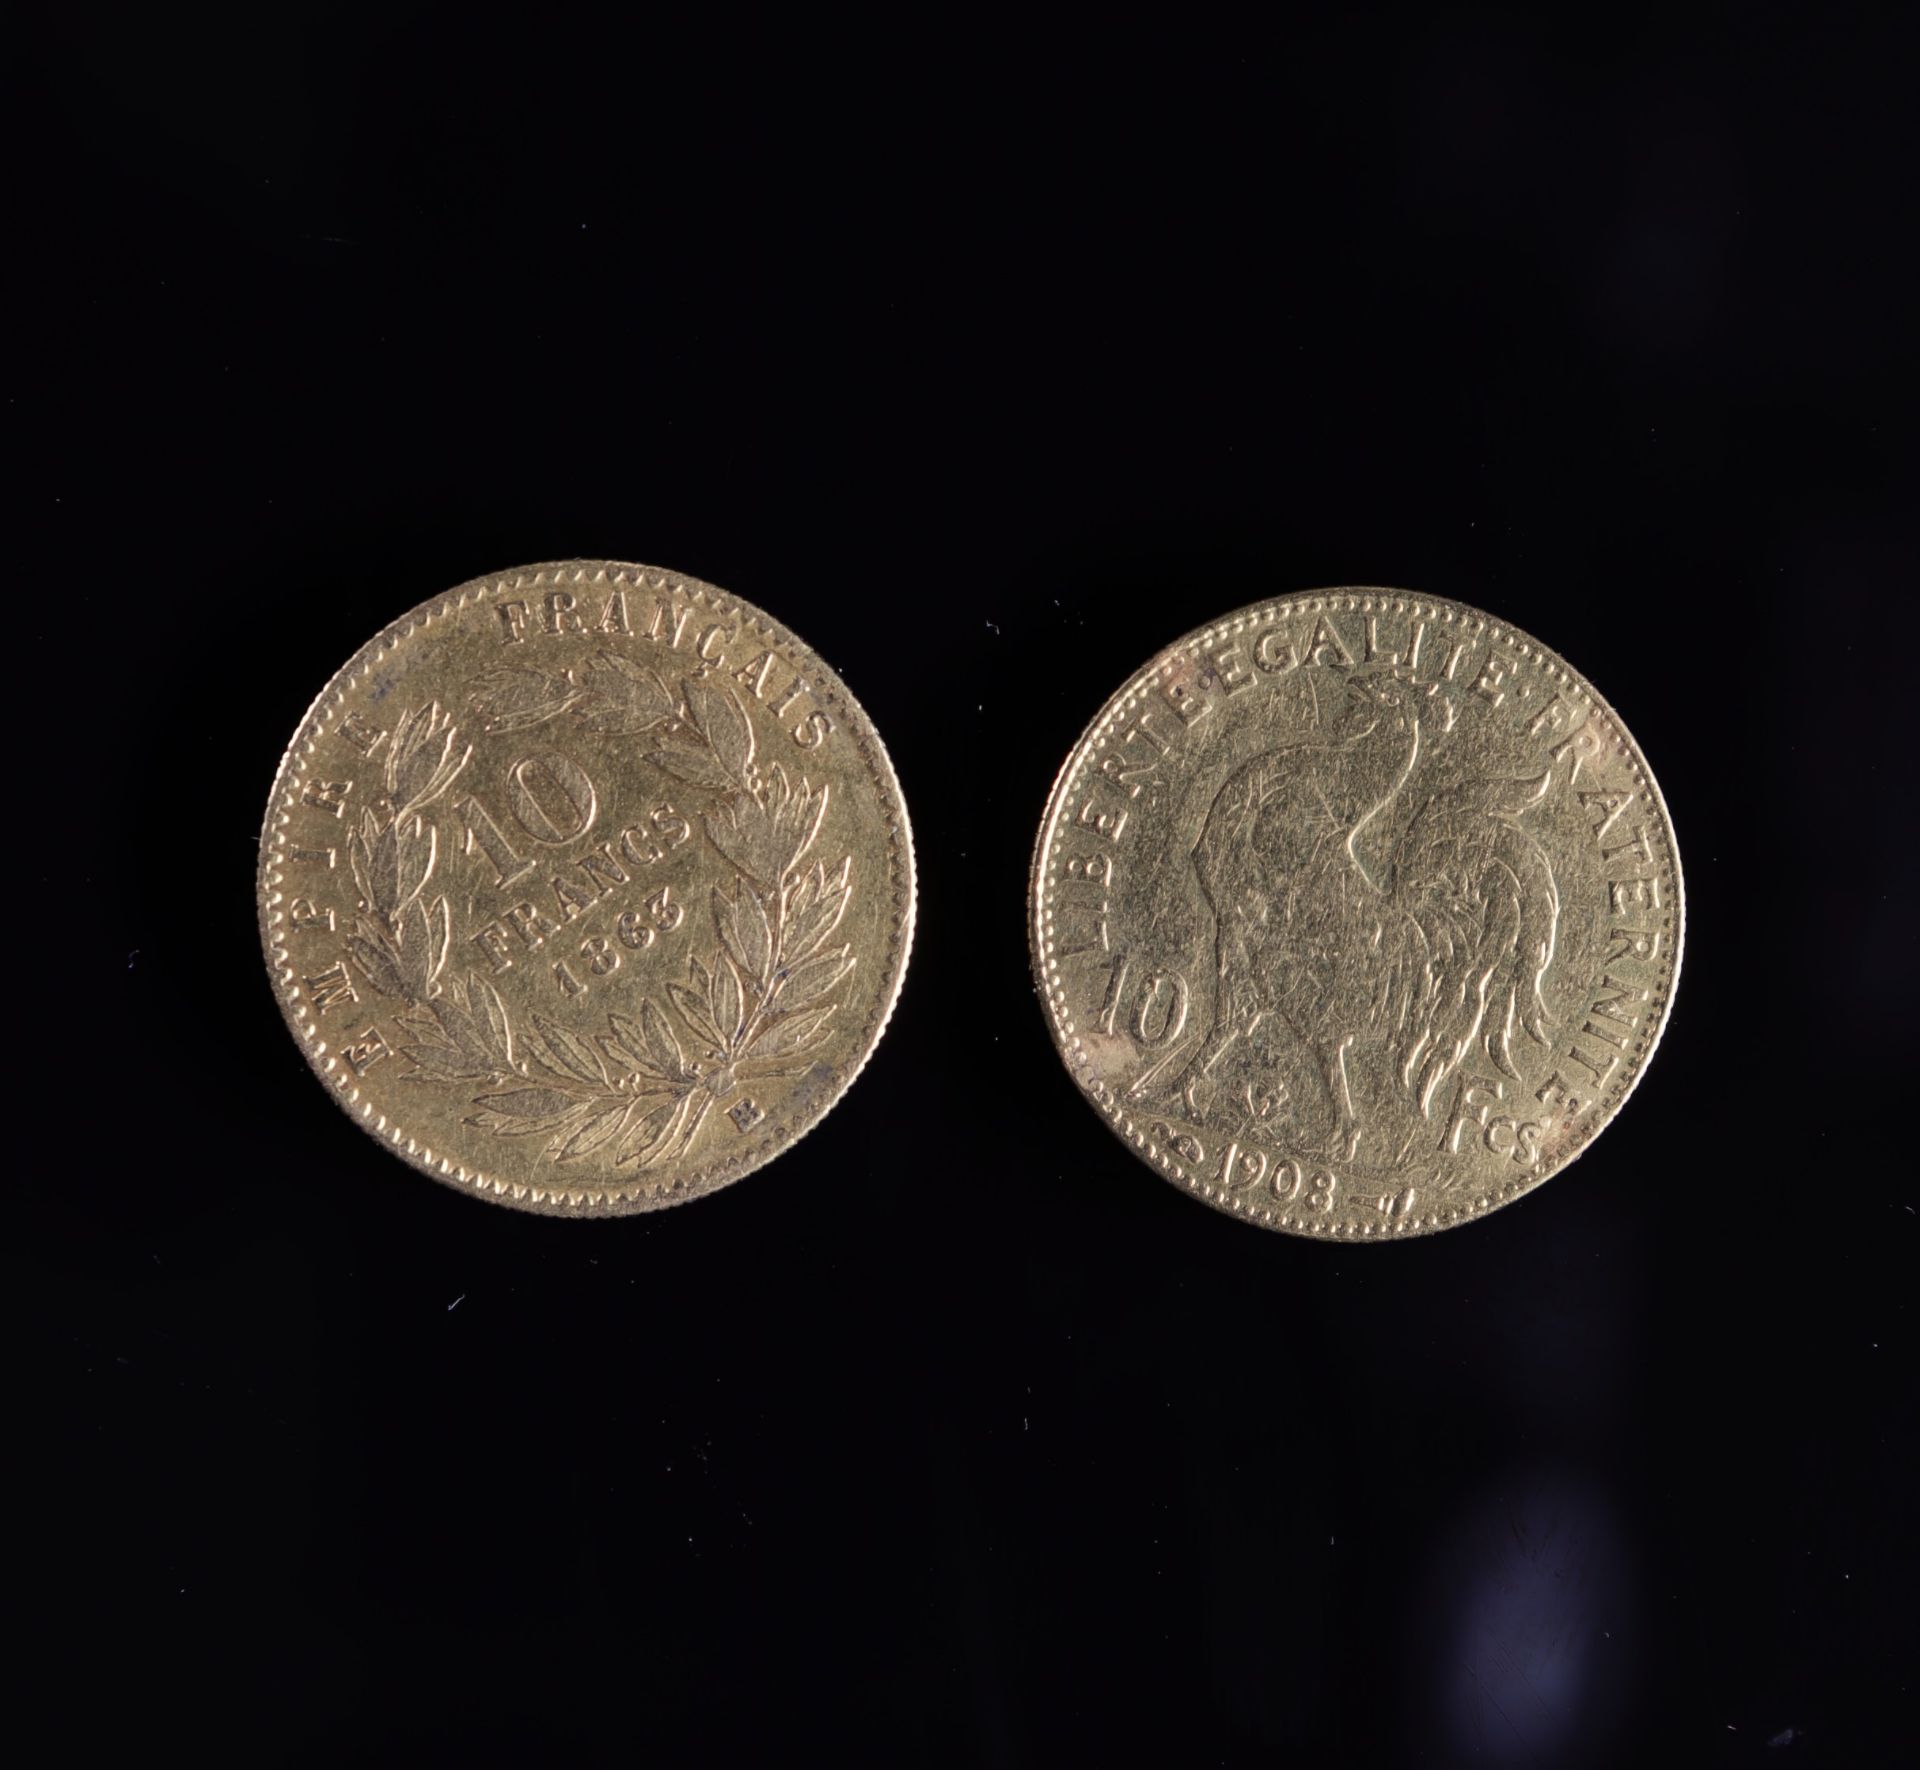 2 gold coins 10 Napoleon francs and 10 Marianne francs - Image 2 of 2